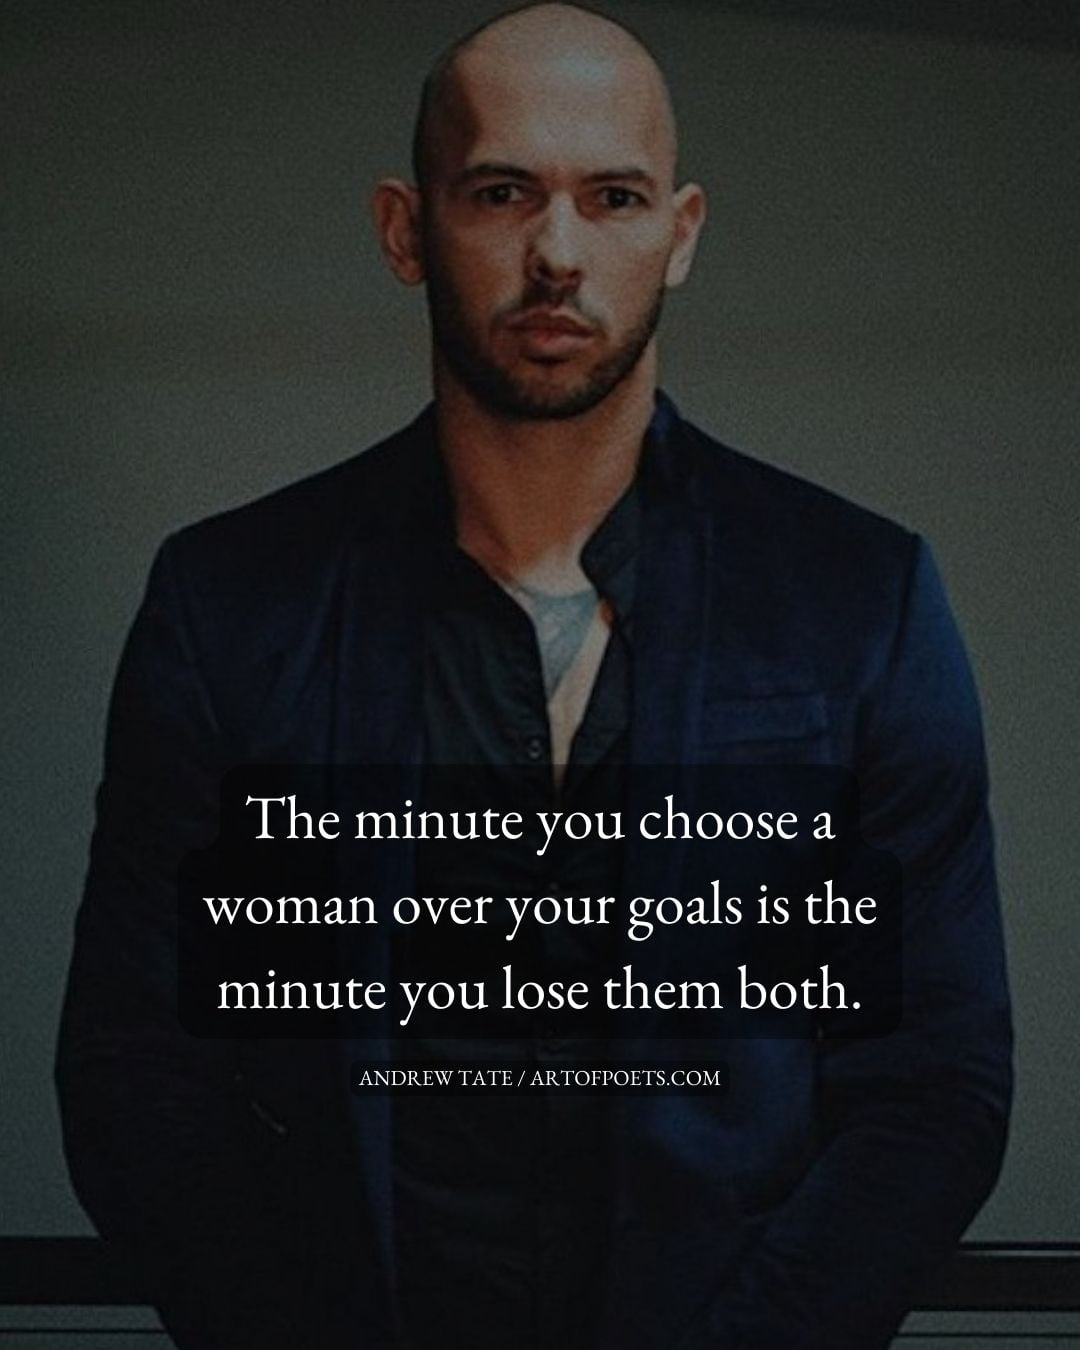 The minute you choose a woman over your goals is the minute you lose them both 1